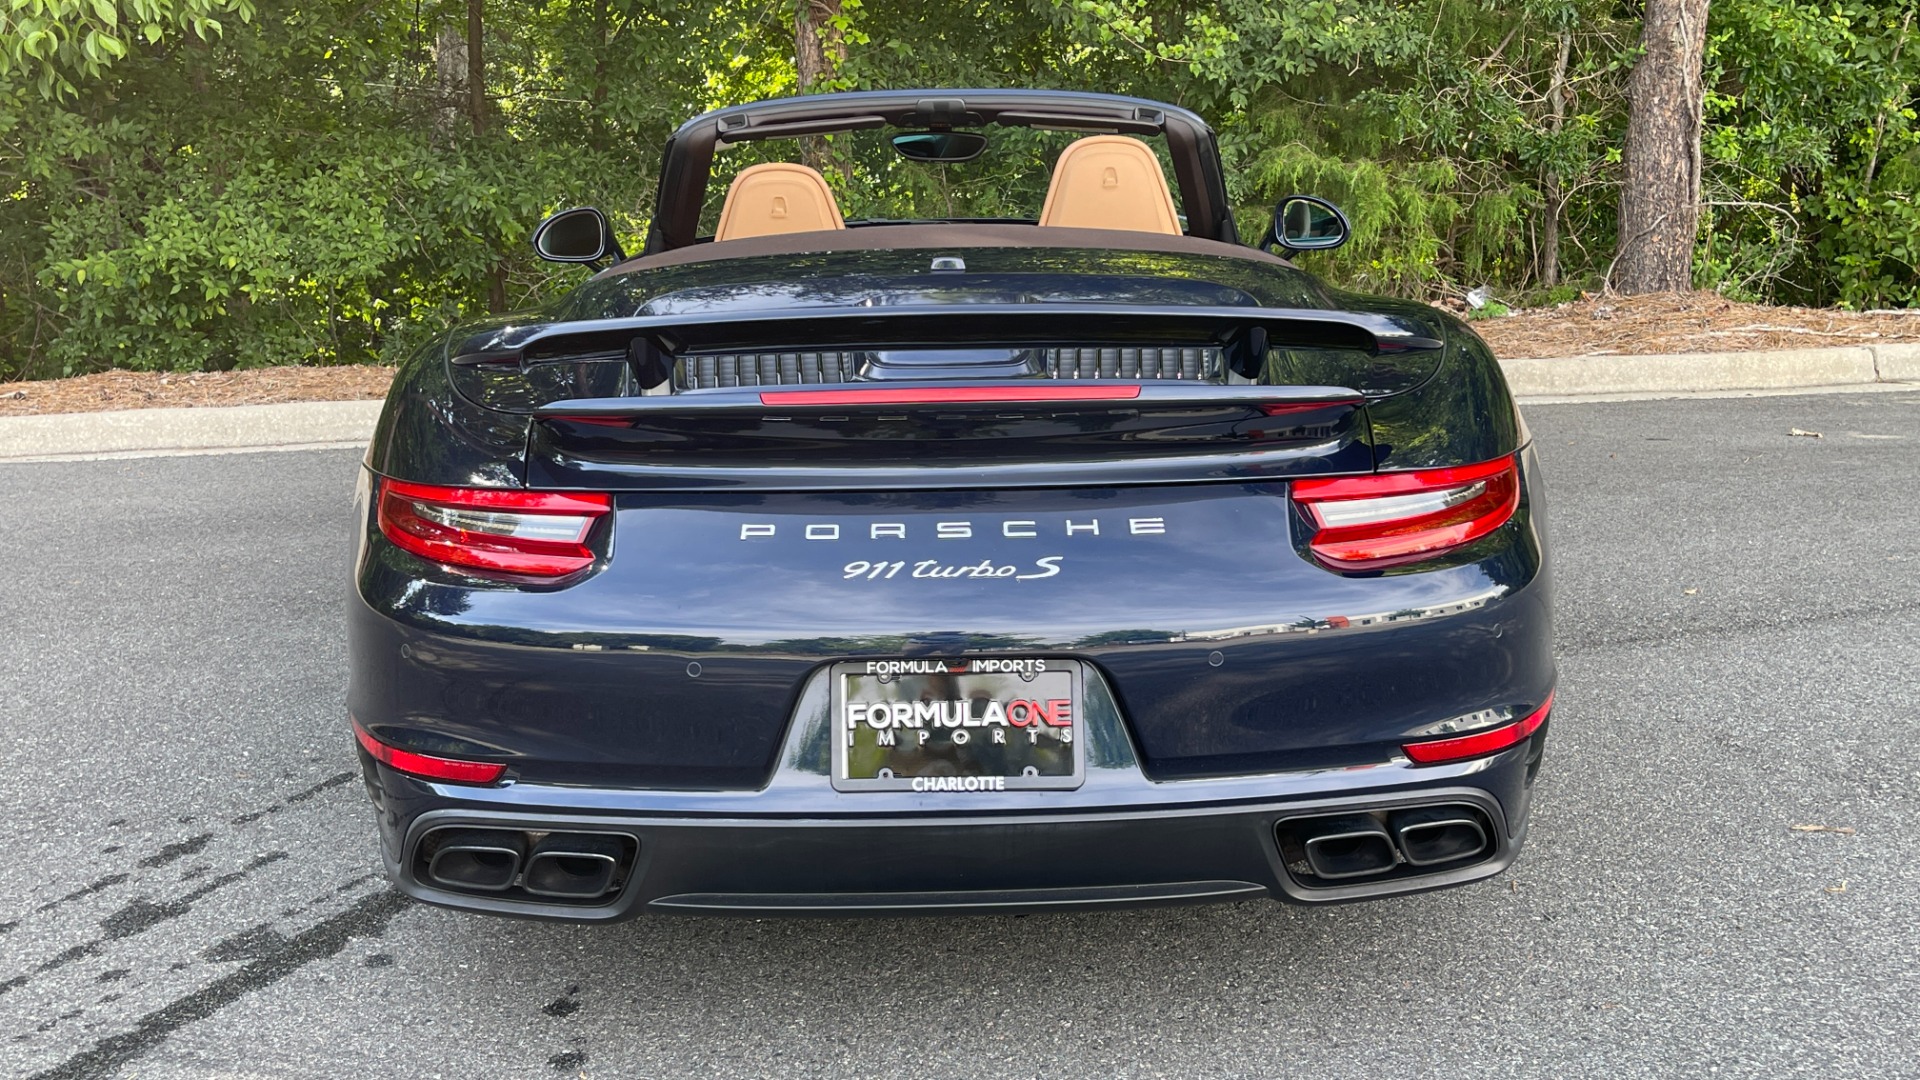 Used 2017 Porsche 911 Turbo S / CABRIOLET / FRONT LIFT / PDK / 20IN WHEELS for sale Sold at Formula Imports in Charlotte NC 28227 23